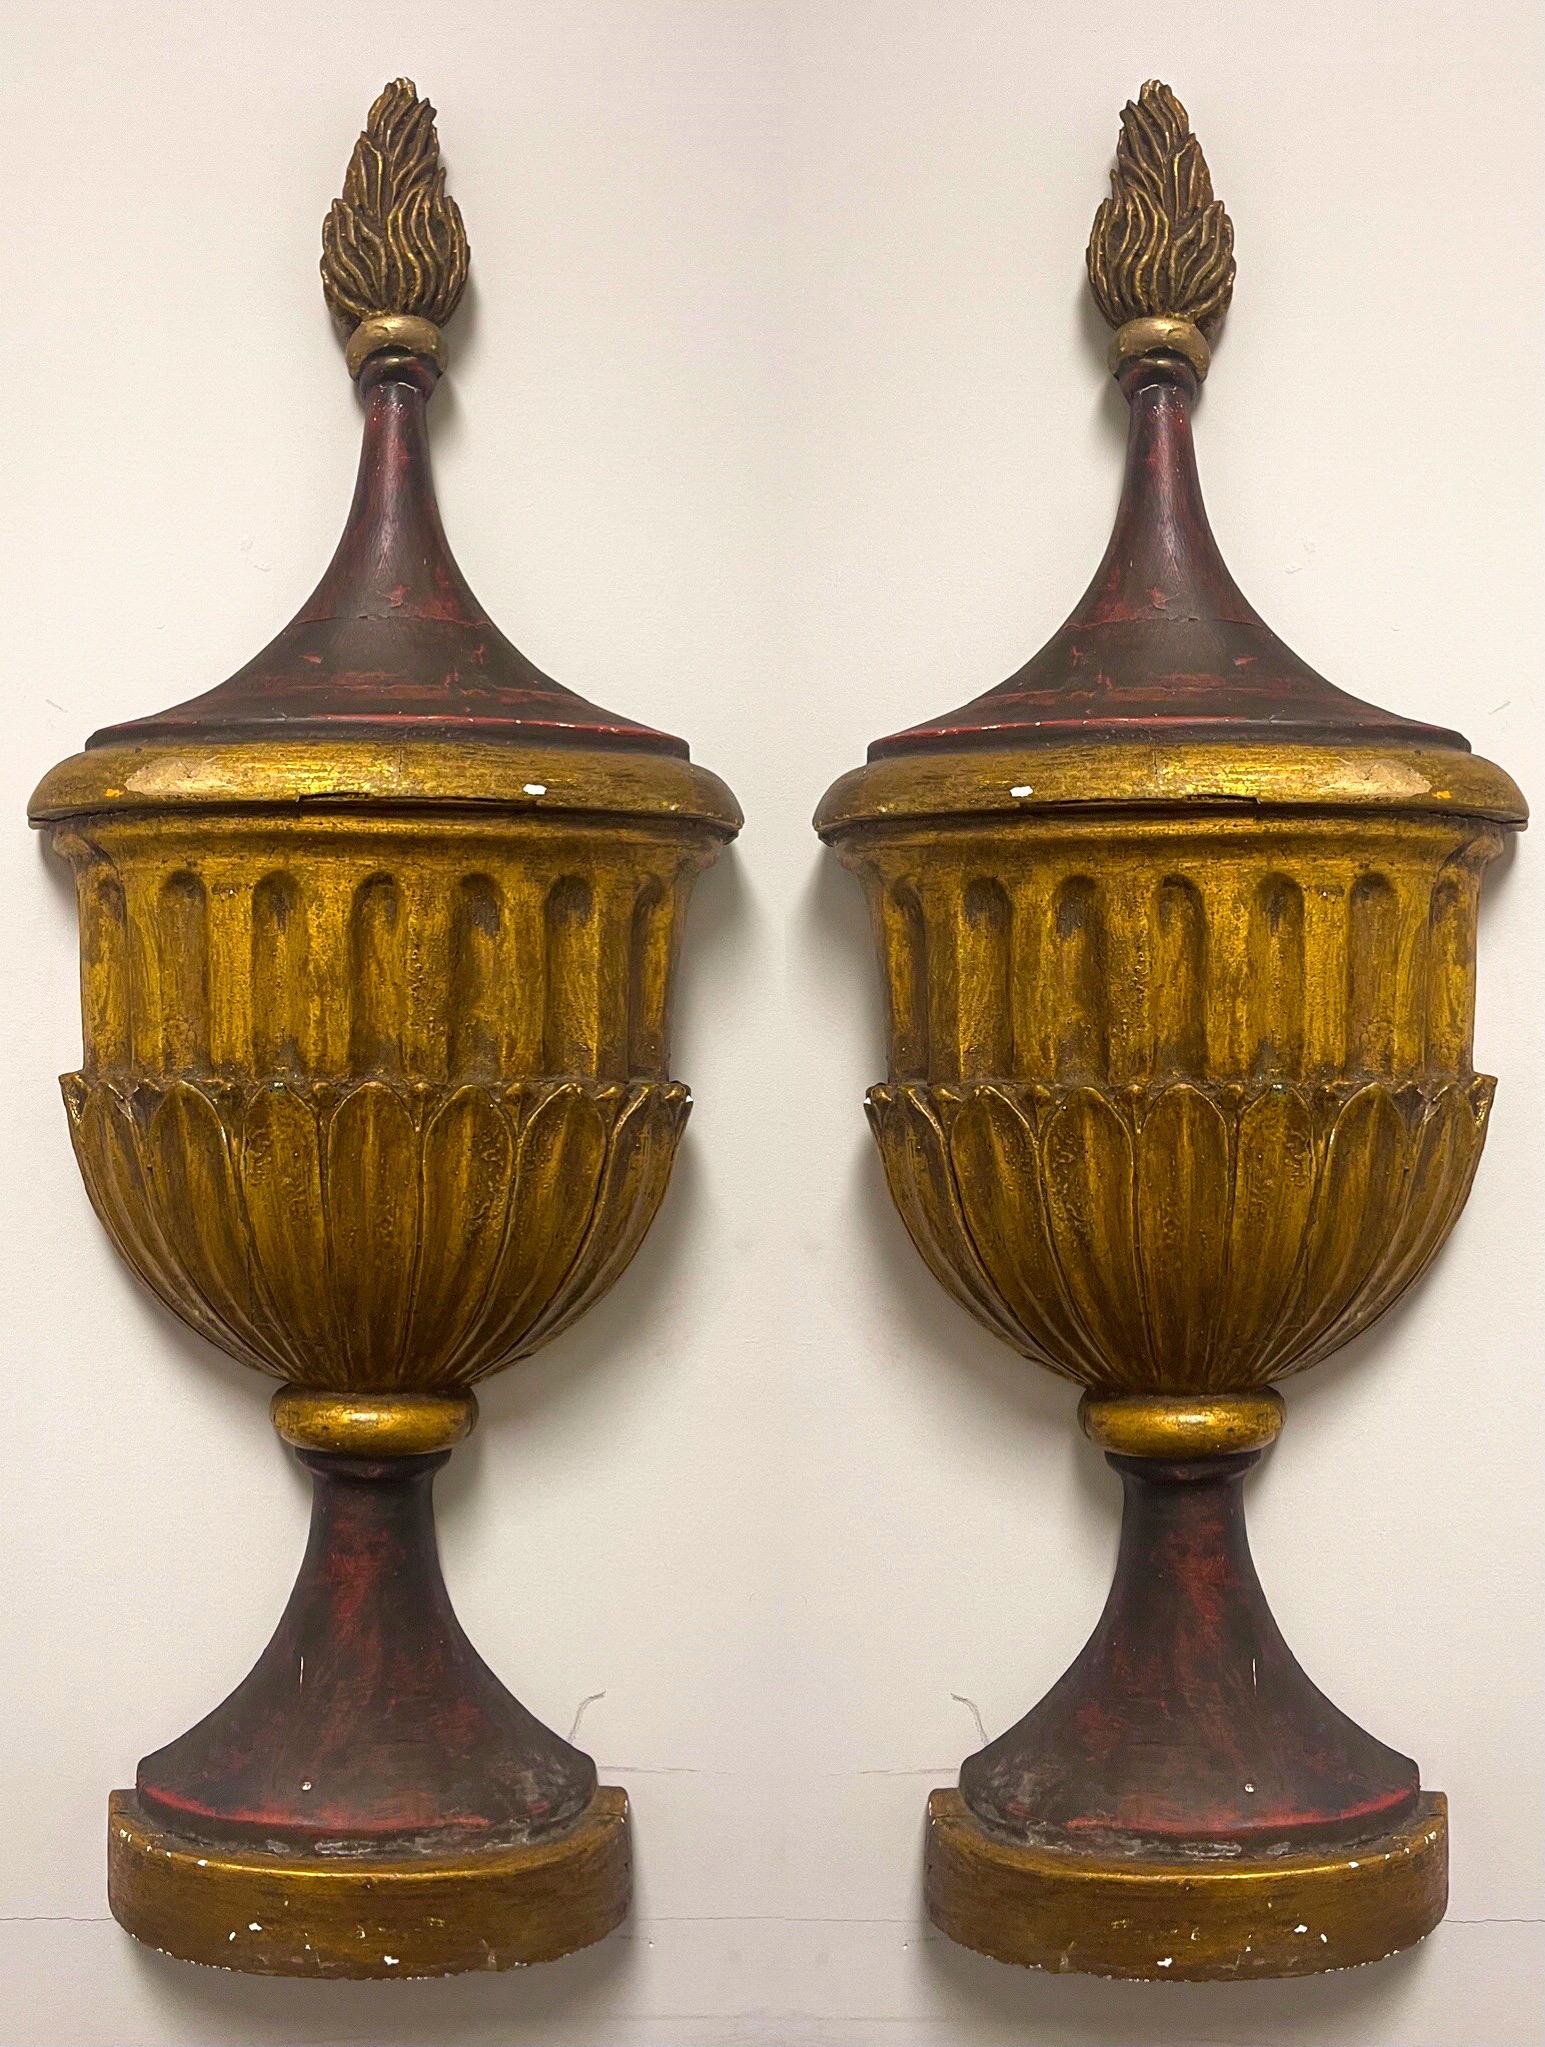 20th Century Large Italian Neo-Classical Style Gilt and Gesso Painted Wall Mounted Urns -Pair For Sale